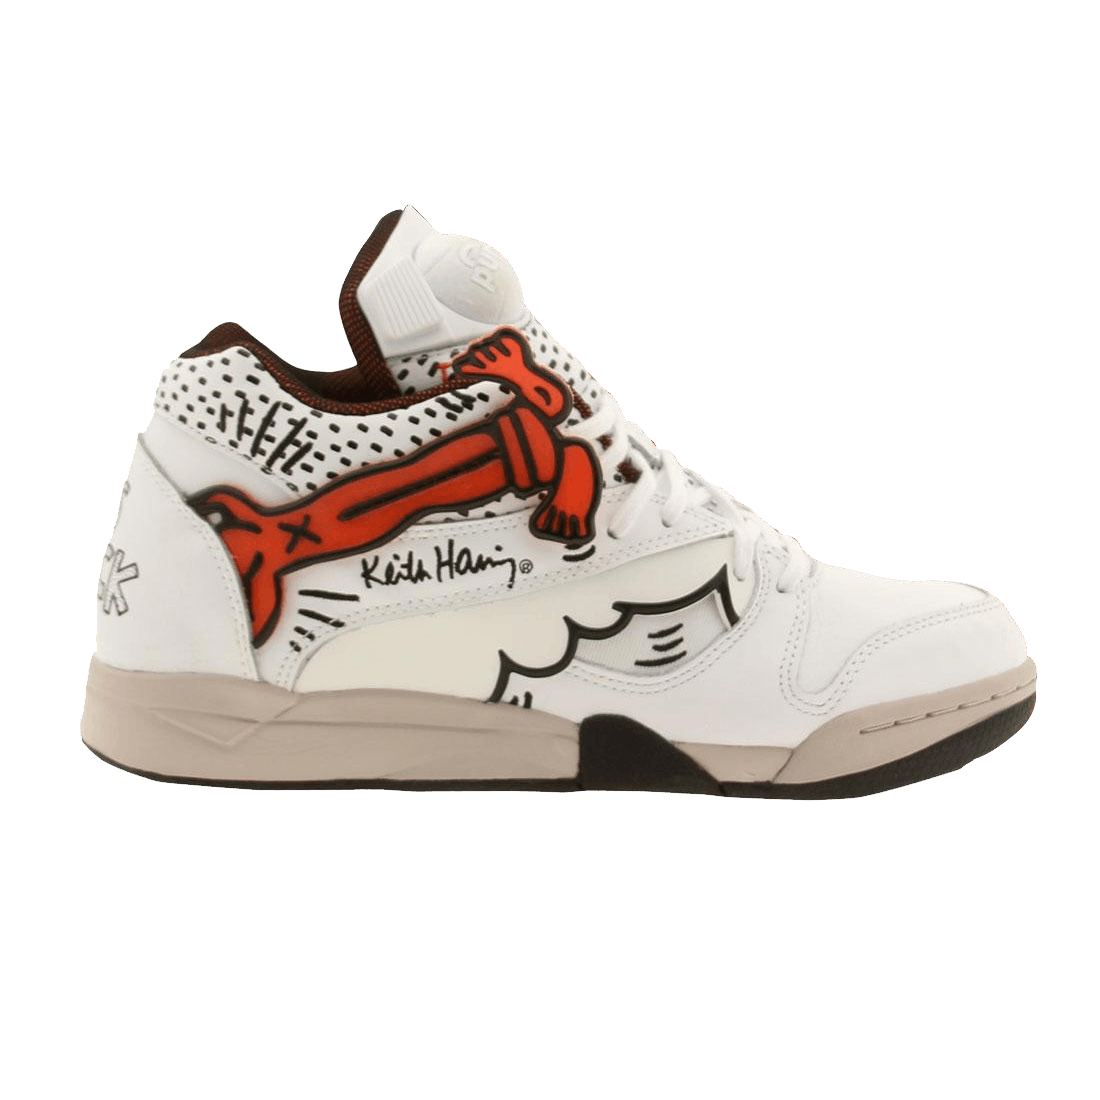 Keith Haring x Court Victory Pump